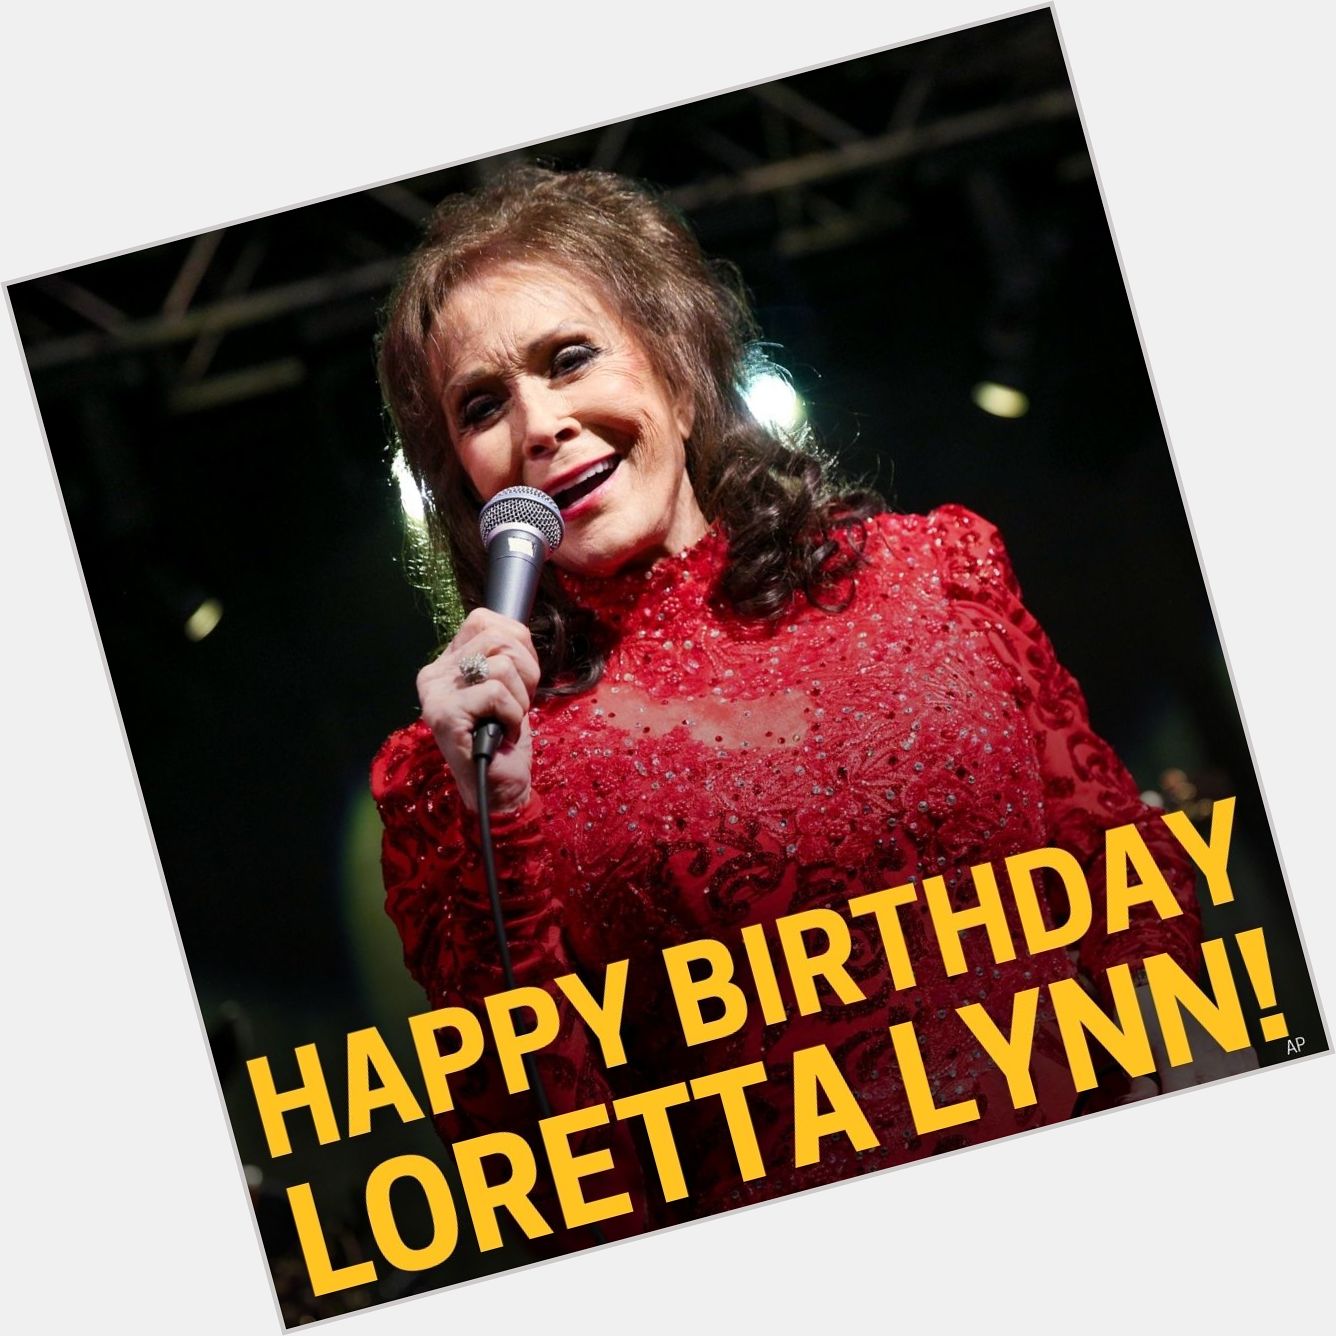 HAPPY BIRTHDAY!!! The Queen of Country Music, Loretta Lynn, turned 90 today! 